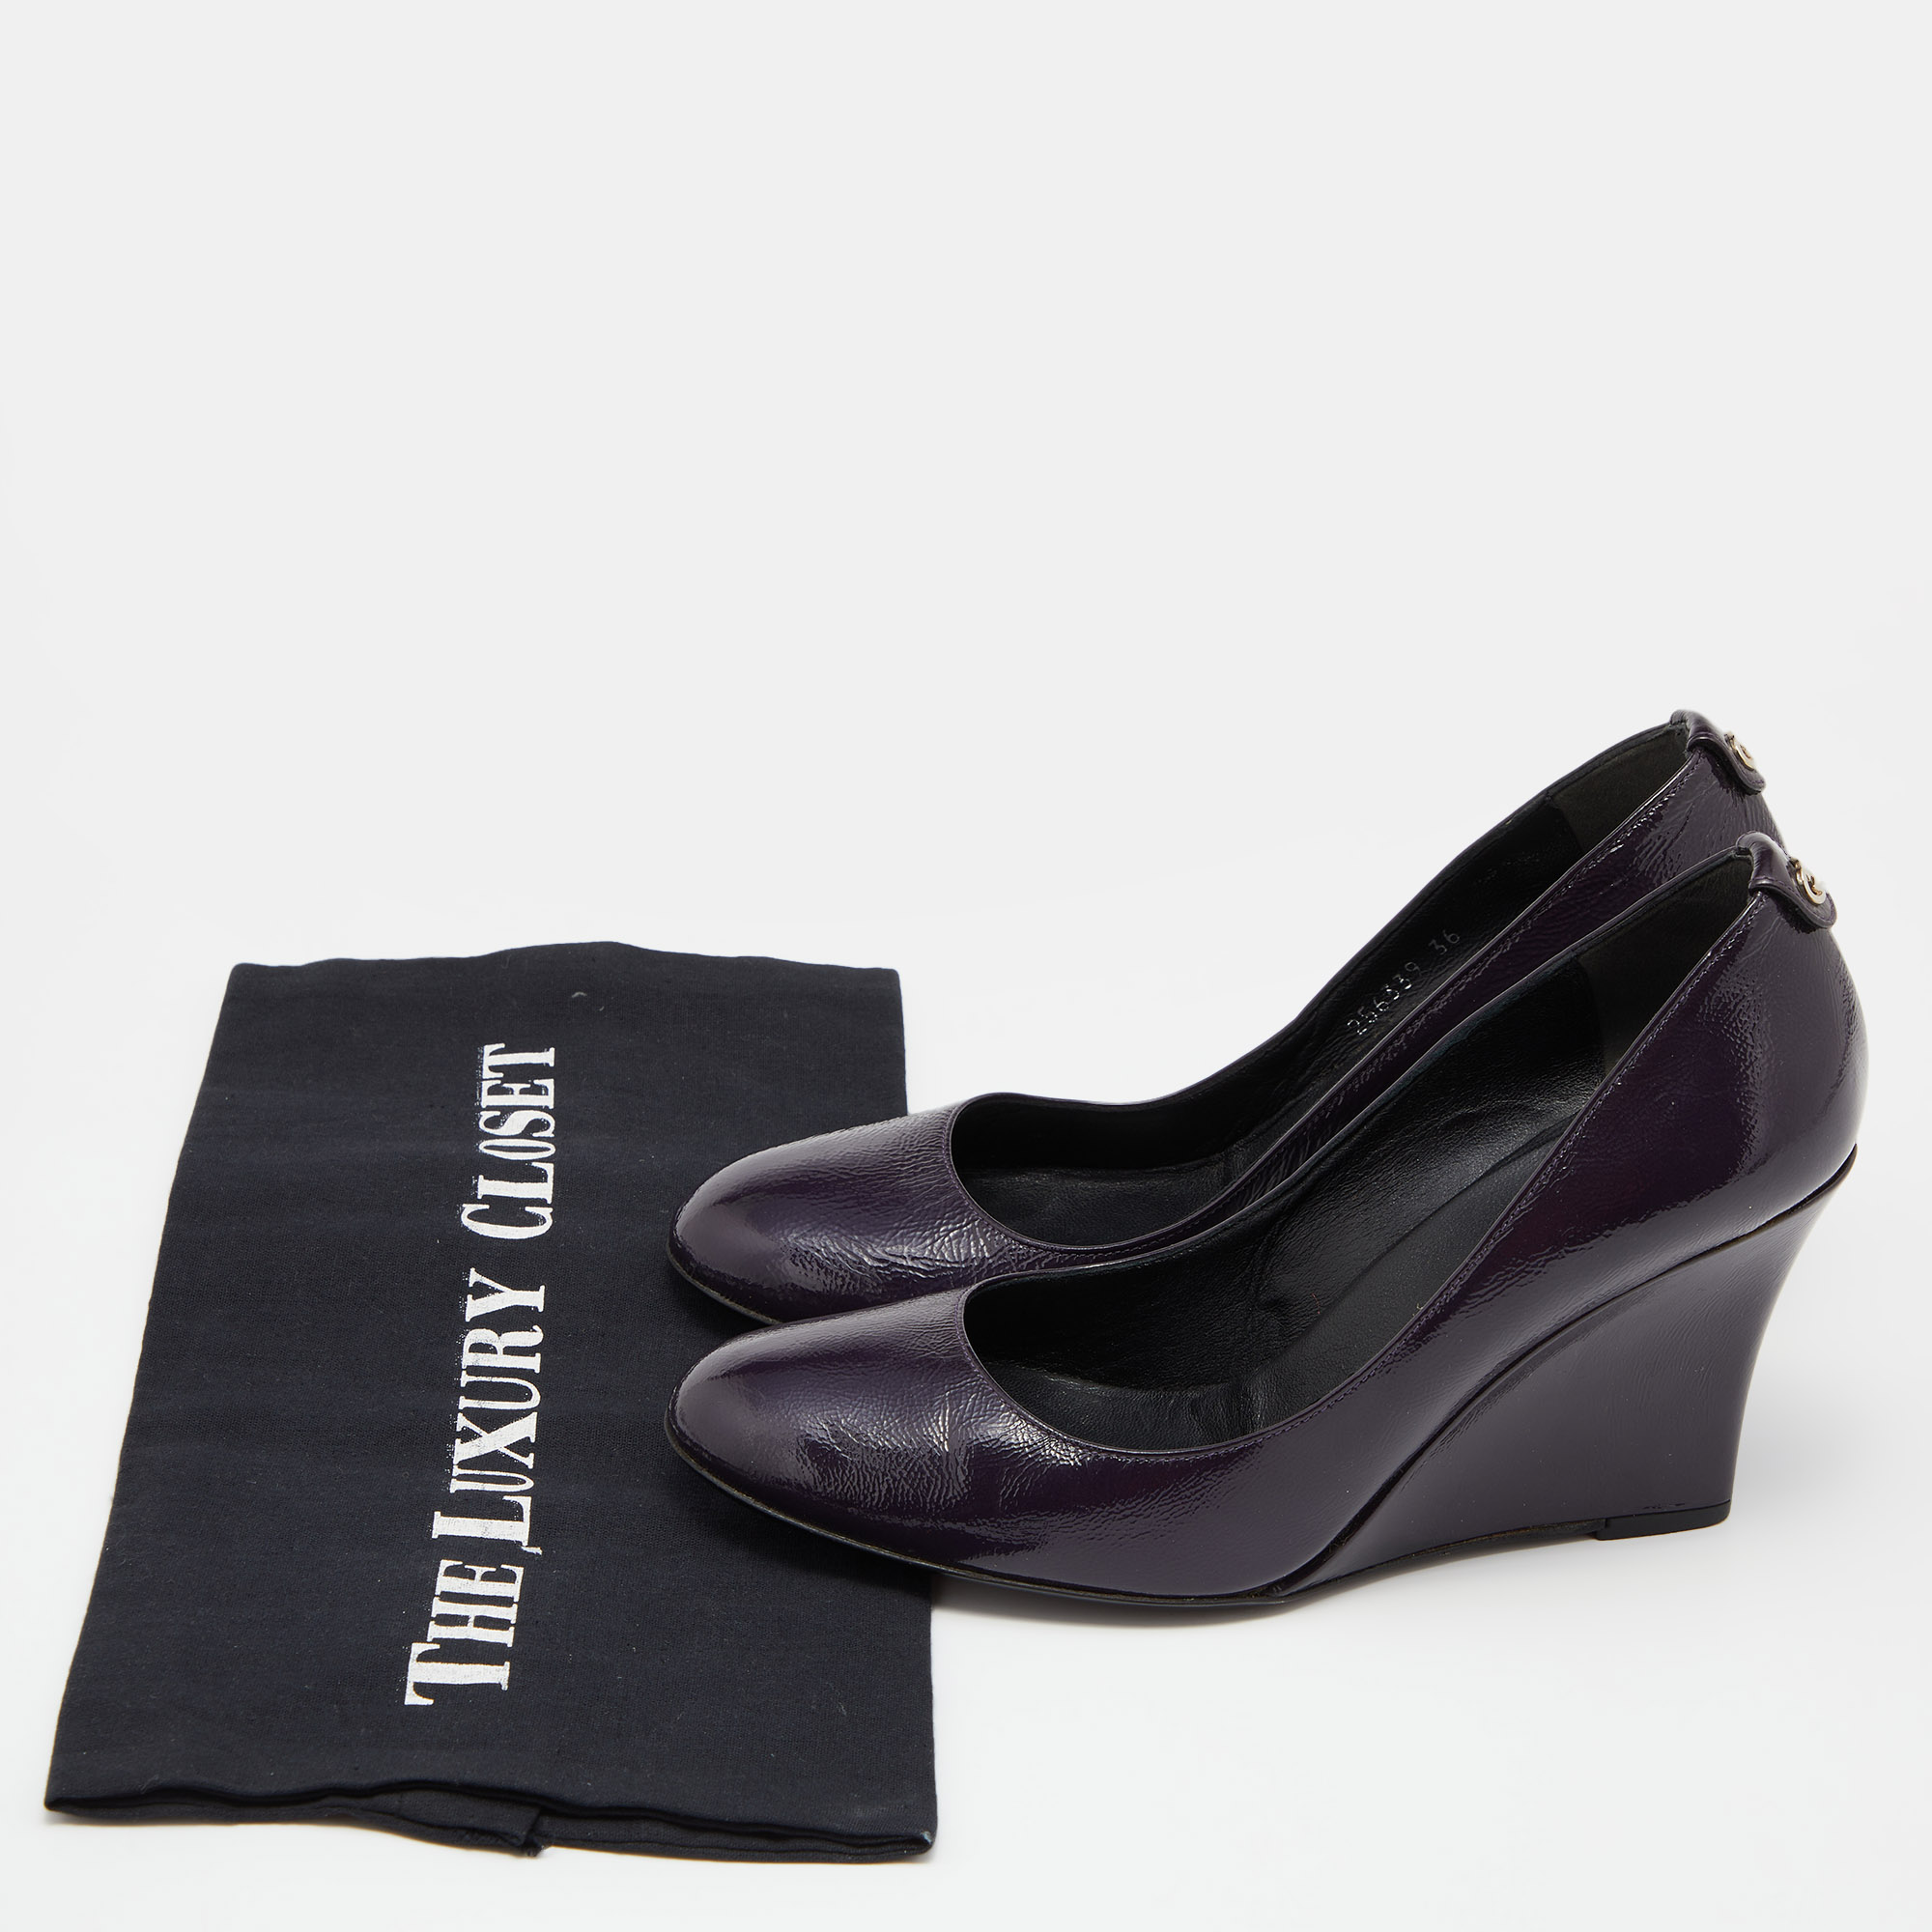 Gucci Purple Patent Leather Wedge Round Toe Pumps Size 36